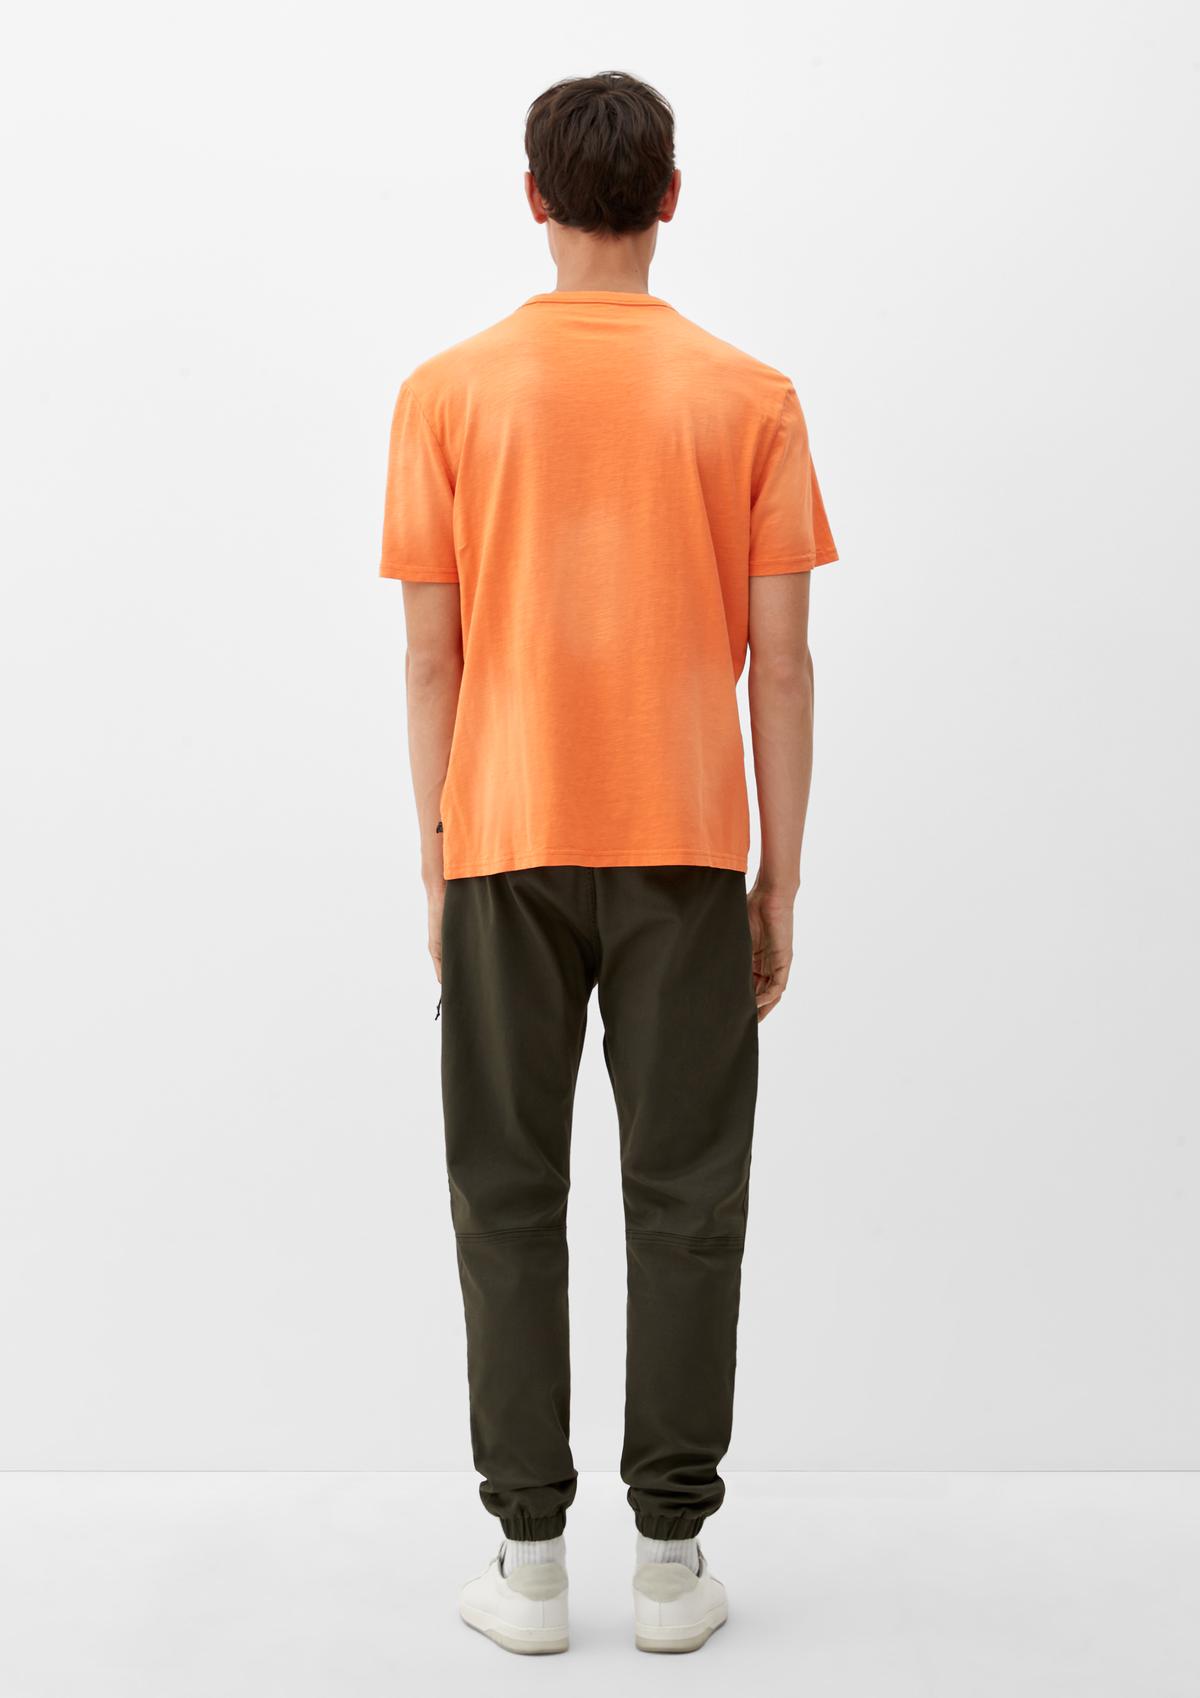 T-shirt with - pocket orange breast a